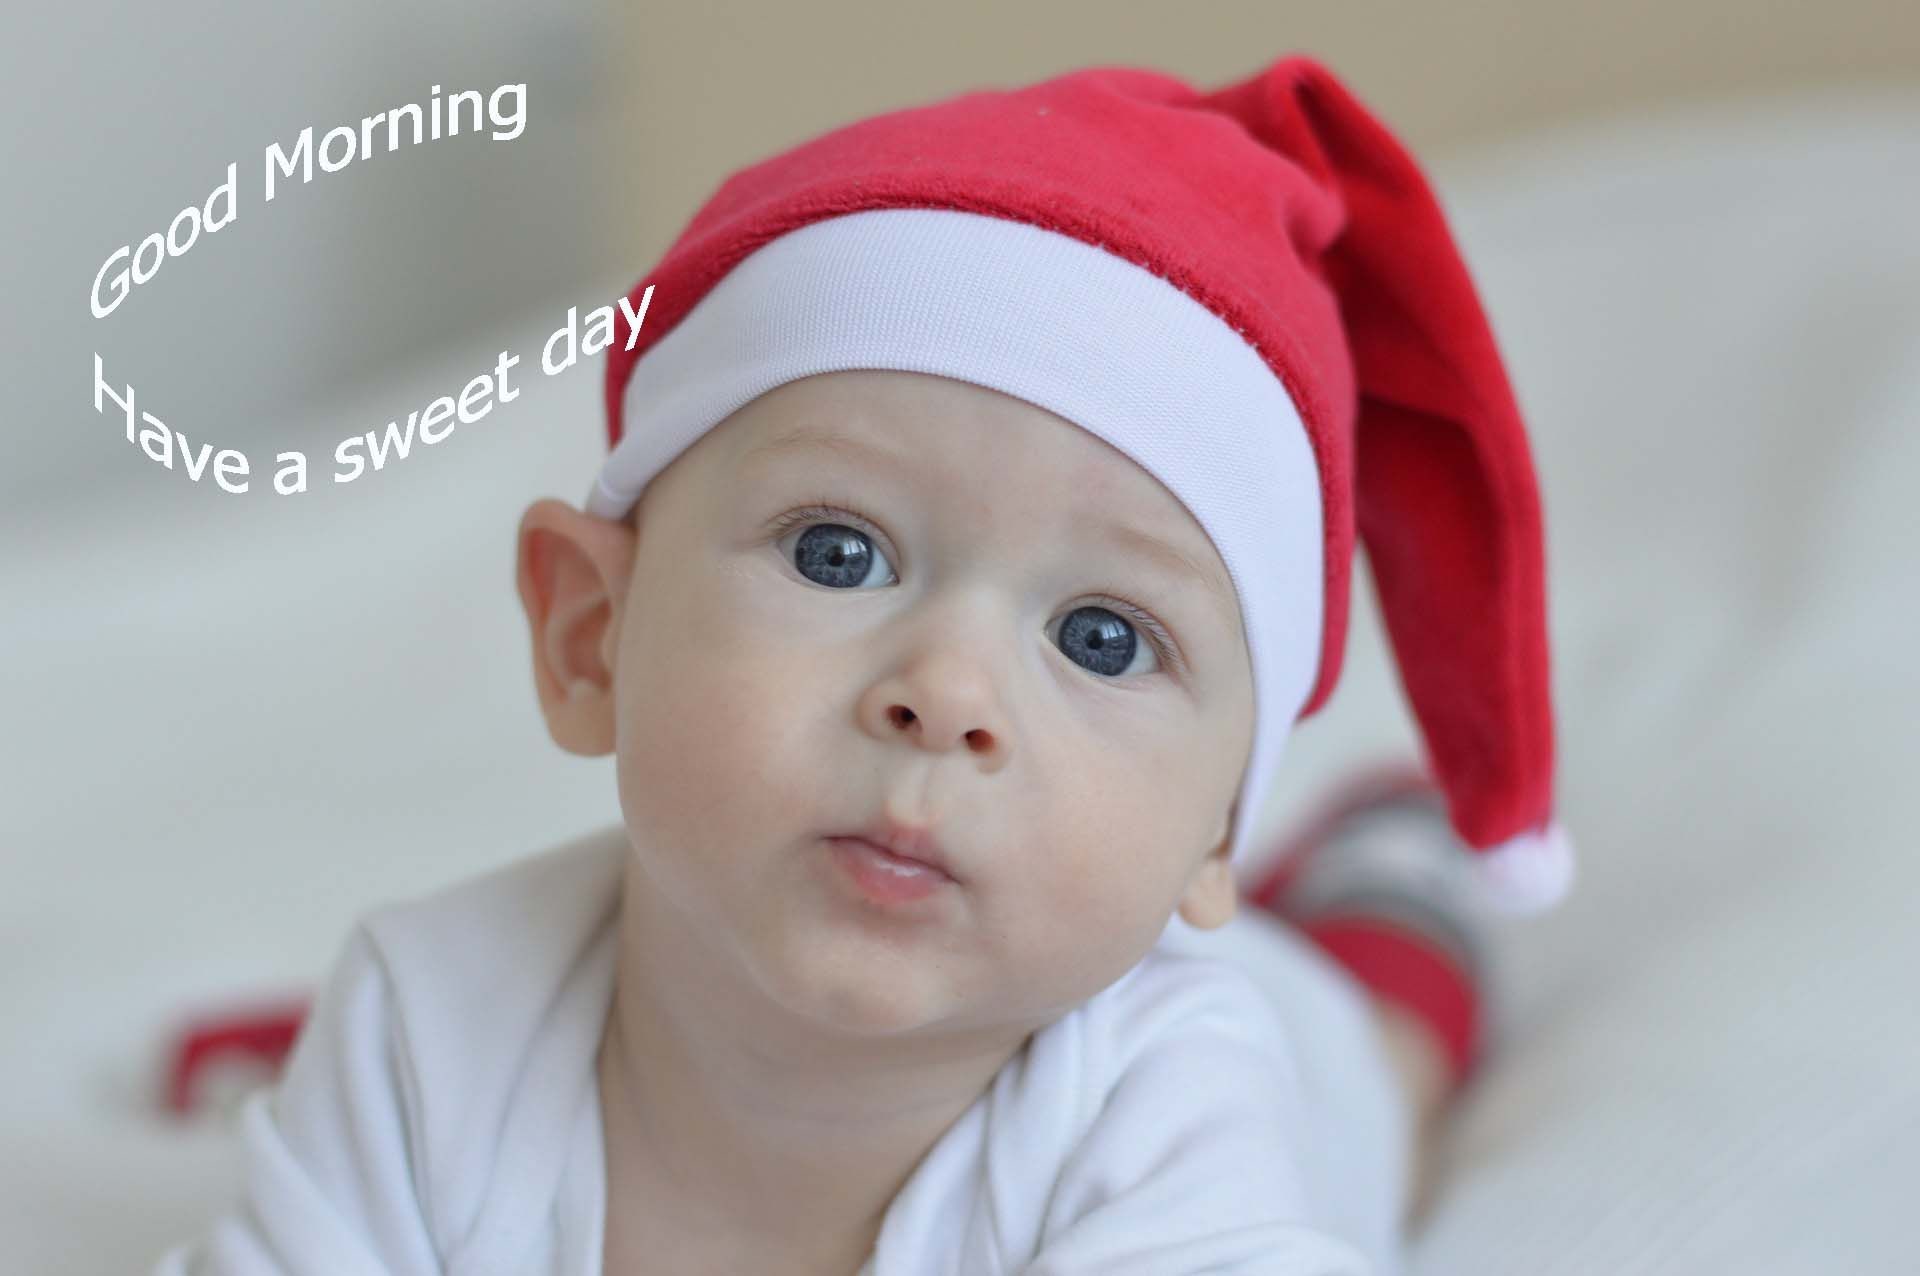 1920x1276 Cute good morning baby wallpaper free download with message